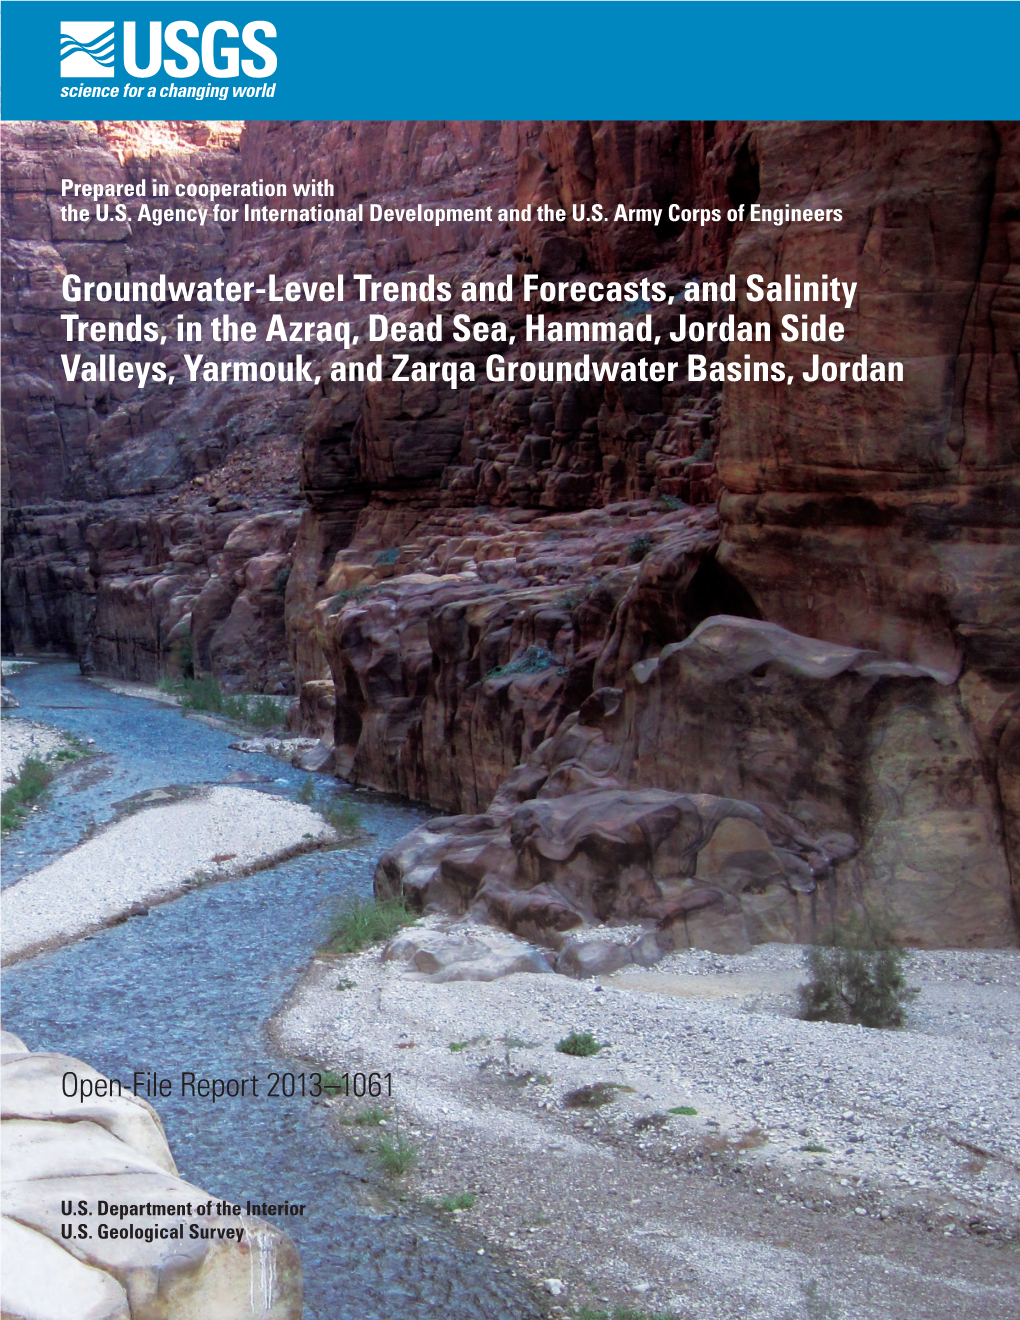 Groundwater-Level Trends and Forecasts, and Salinity Trends, in the Azraq, Dead Sea, Hammad, Jordan Side Valleys, Yarmouk, and Zarqa Groundwater Basins, Jordan